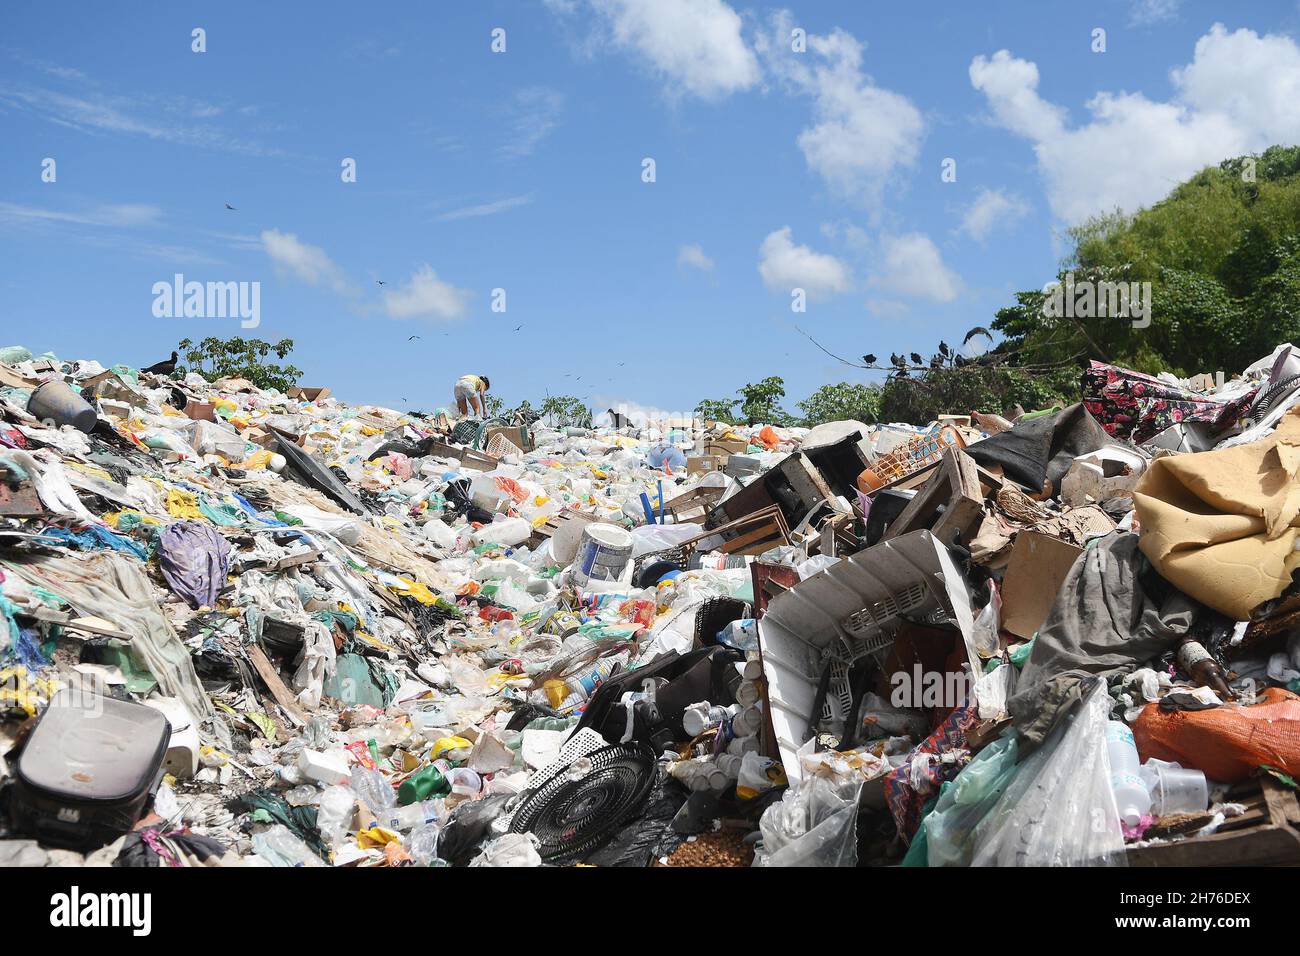 Afuá,Brazil,November 11, 2021. Child working in the dump of the city of Afuá, on the island of Marajó in the state of Pará. Stock Photo